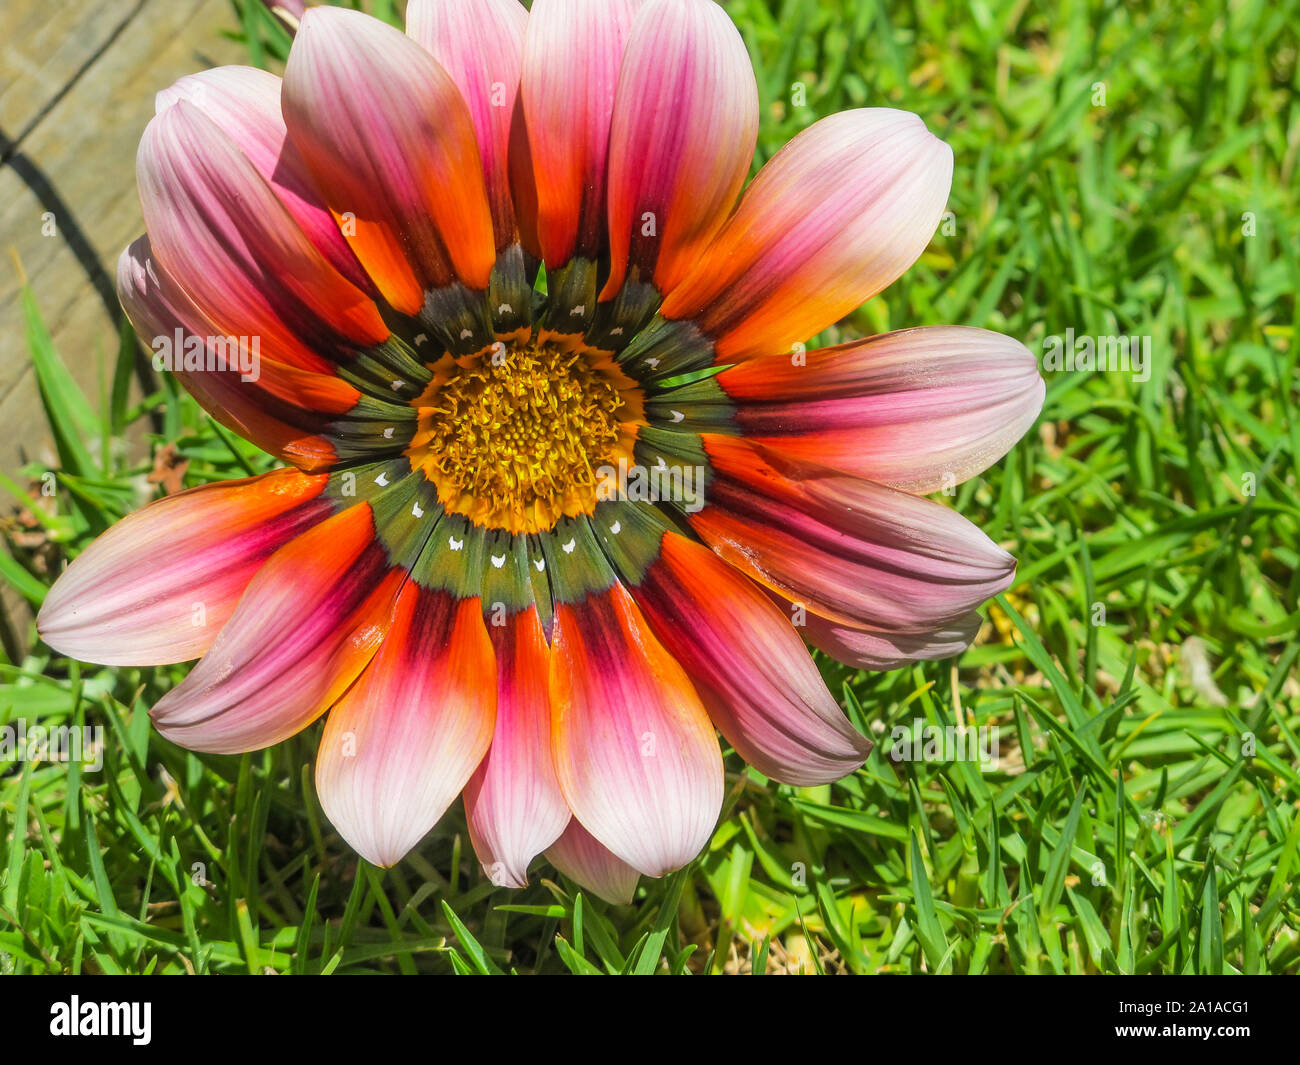 close up or macro shot of a beautiful colourful pink orange Gazania or African daisy flower head drooping onto grass during Summer in nature Stock Photo